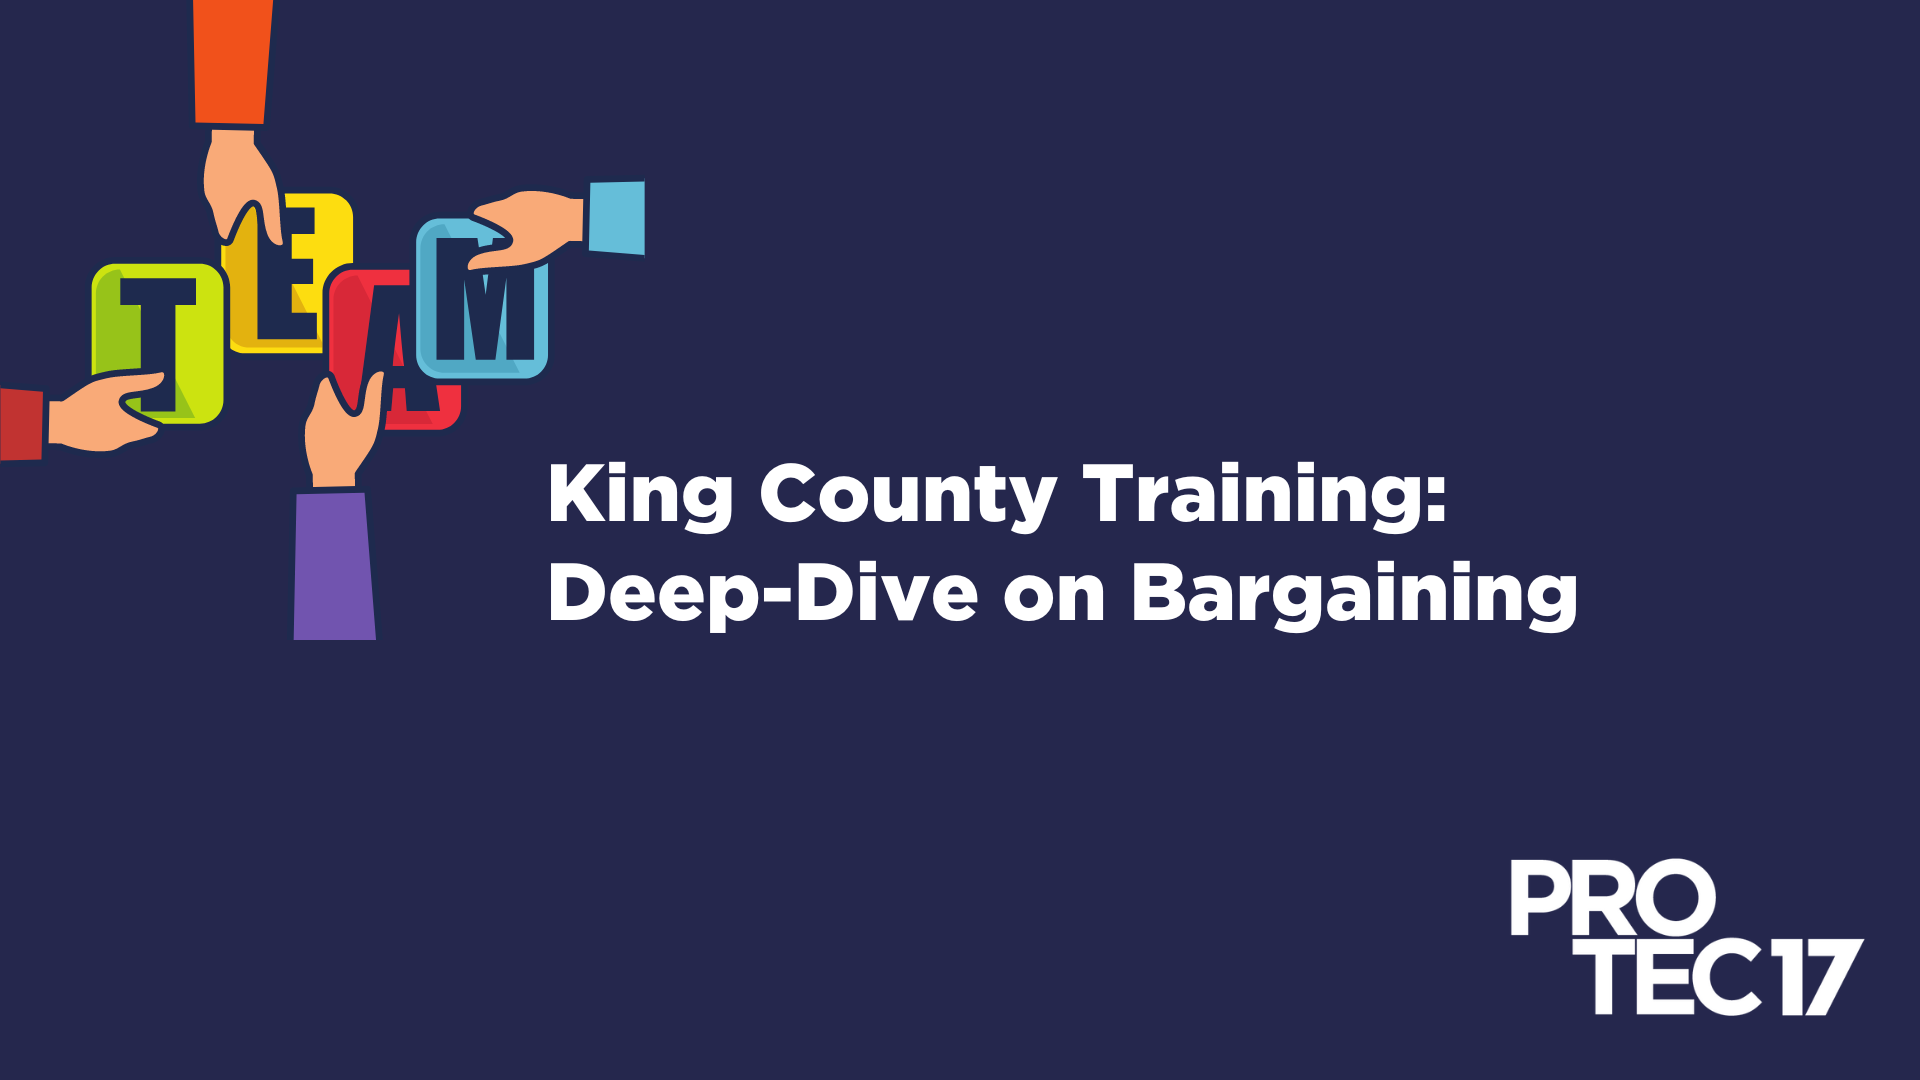 There is a colorful illustration of hands reaching towards one another, each holding a letter to spell out the word: "TEAM." The text on the right reads, "King County Training: Deep-Dive on Bargaining." The PROTEC17 logo is in the bottom right.